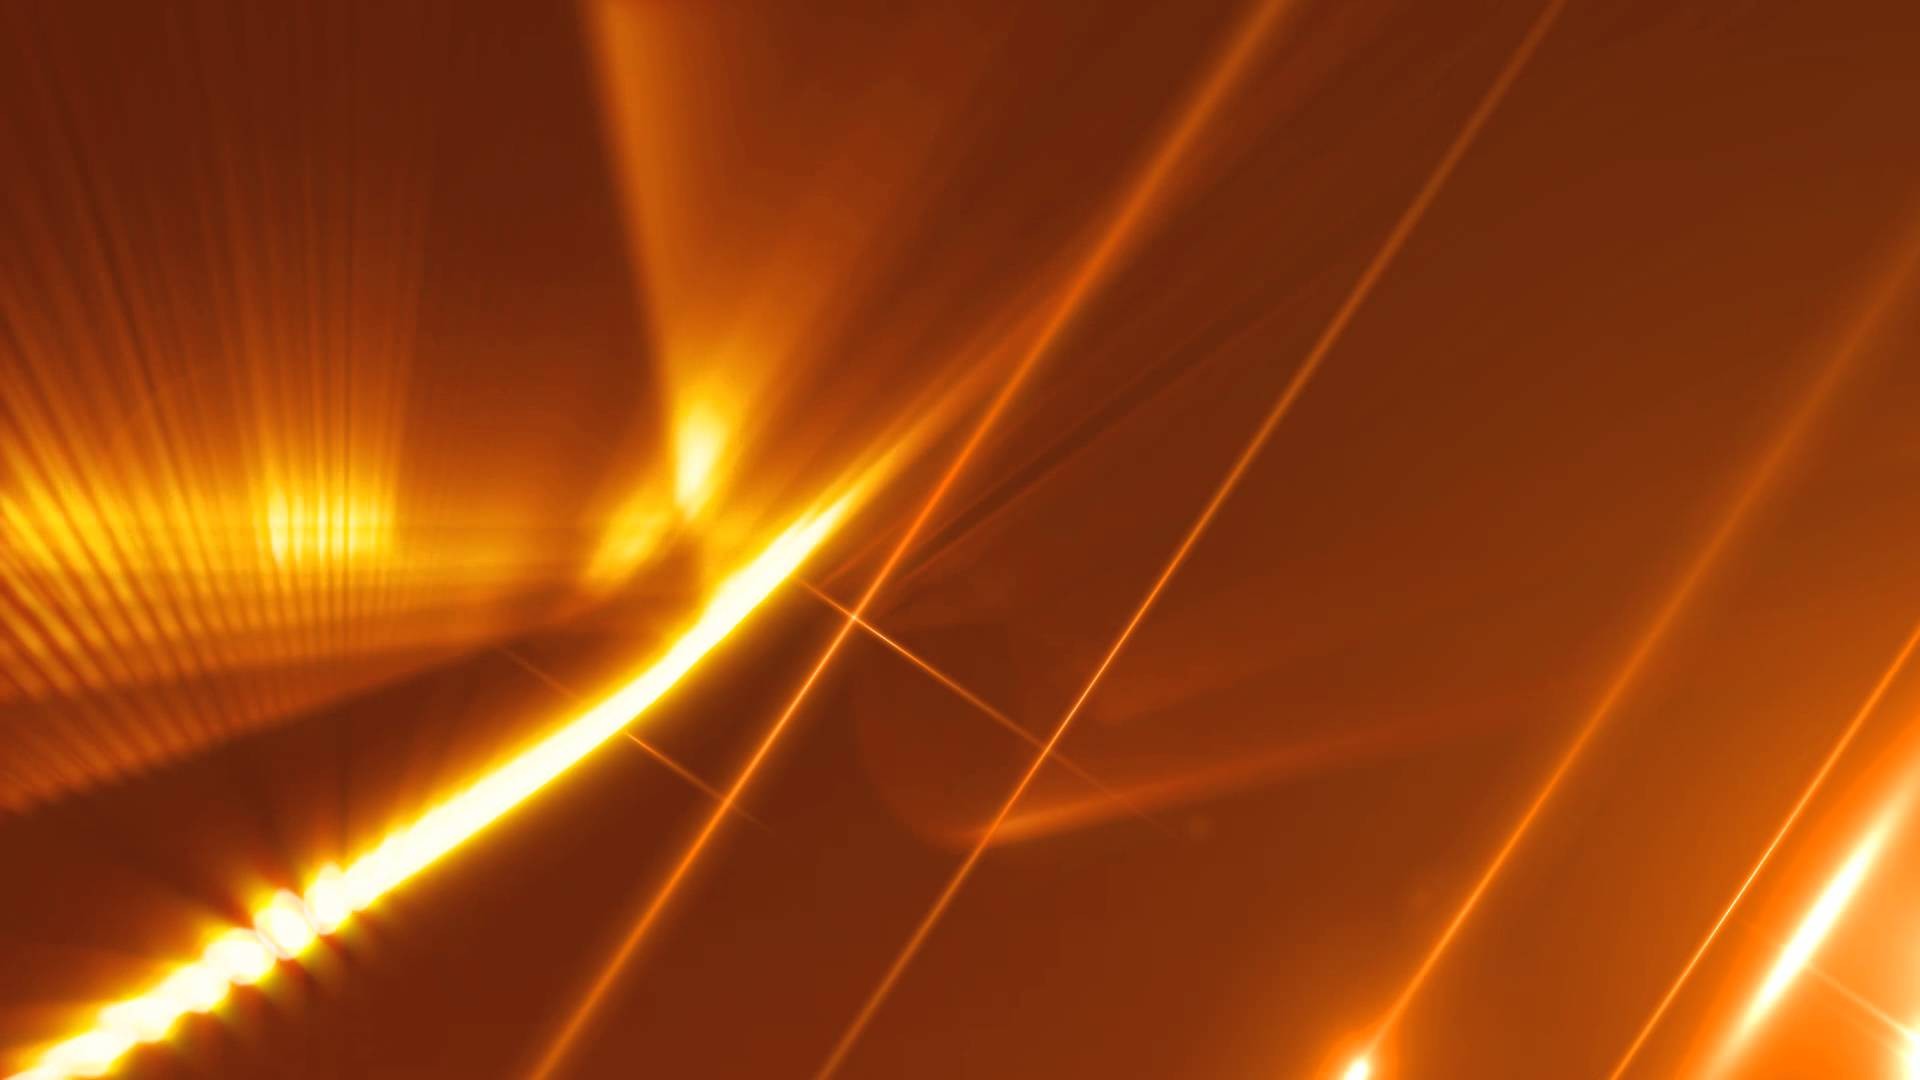  Orange  background   Download free HD backgrounds for 